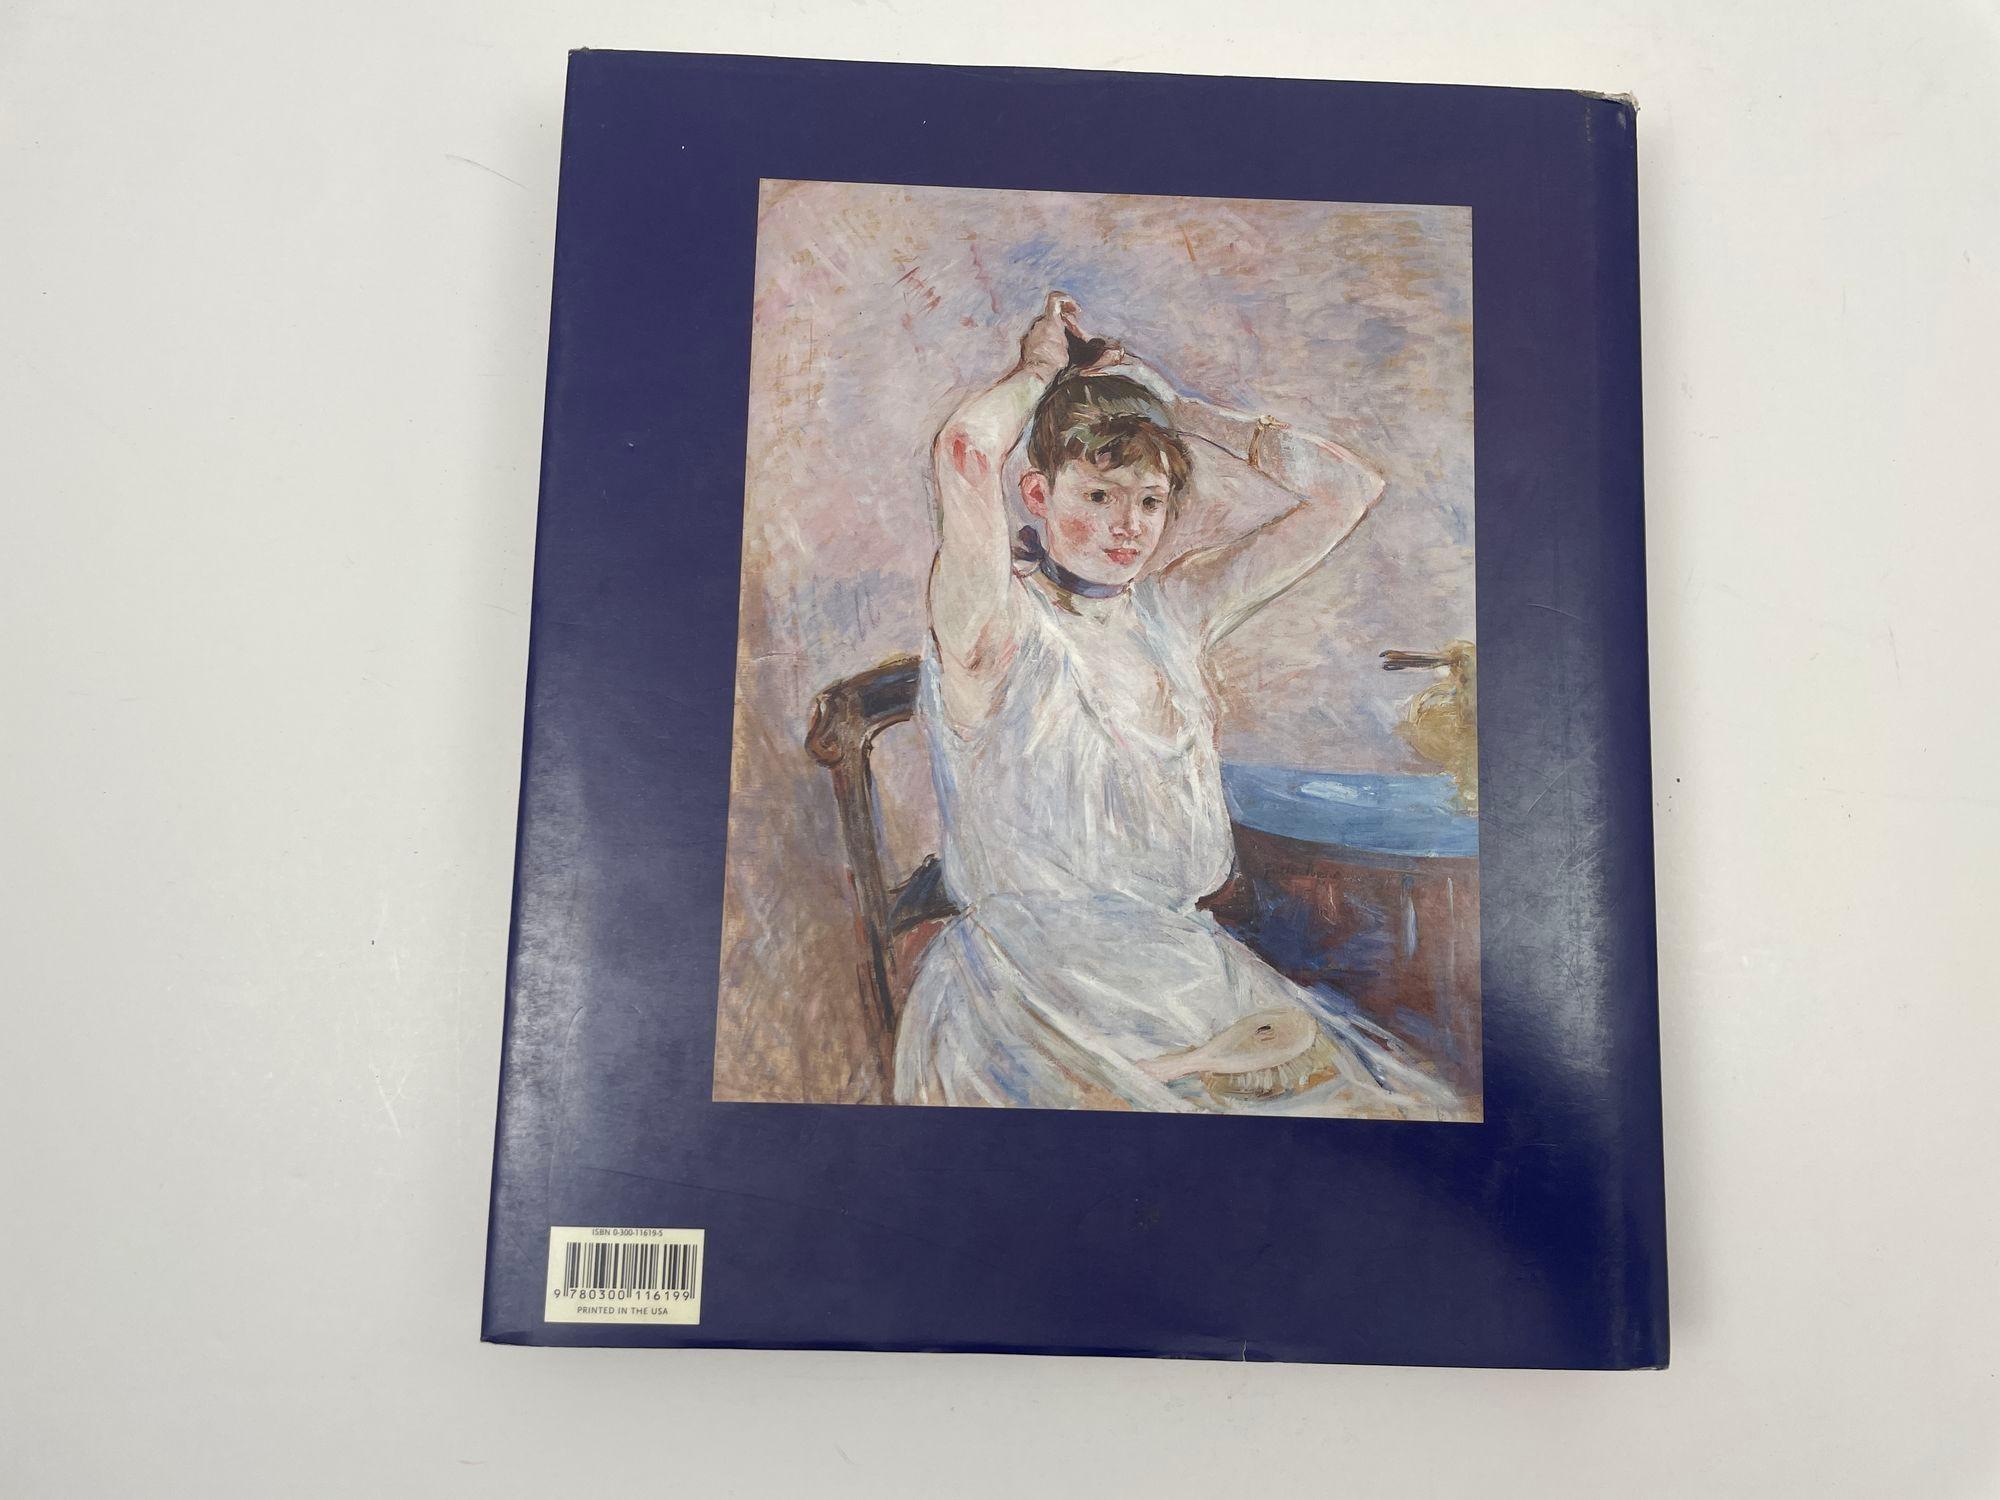 American The Clark Brothers Collect Impressionists and Early Modern Painting Hardcover For Sale